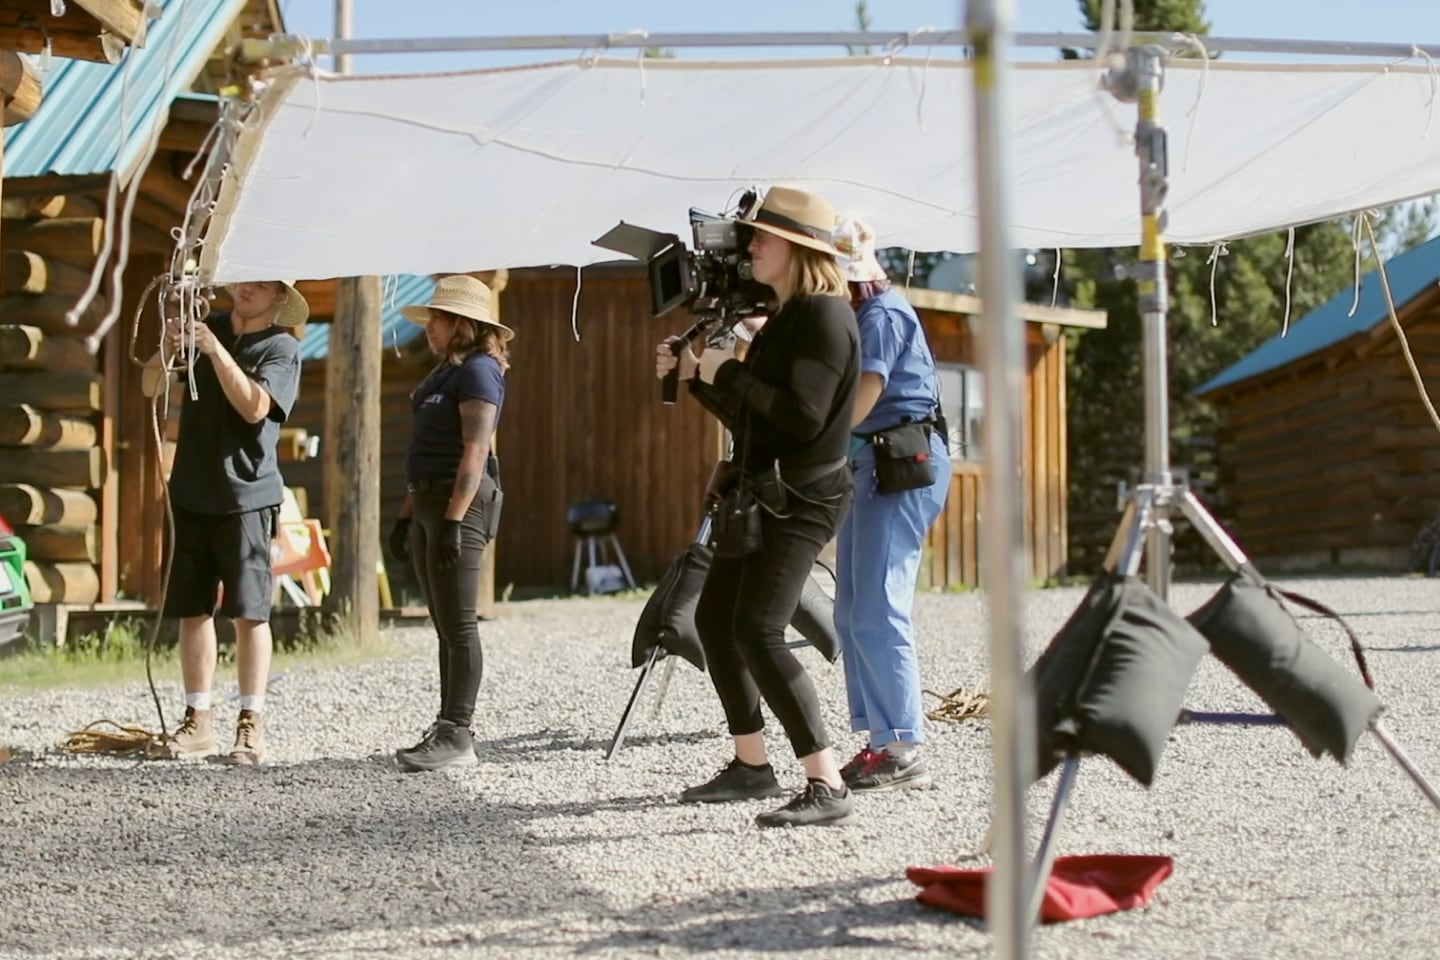 Production crew films while outdoors, creating Showreels to be sent with Dropbox Transfer